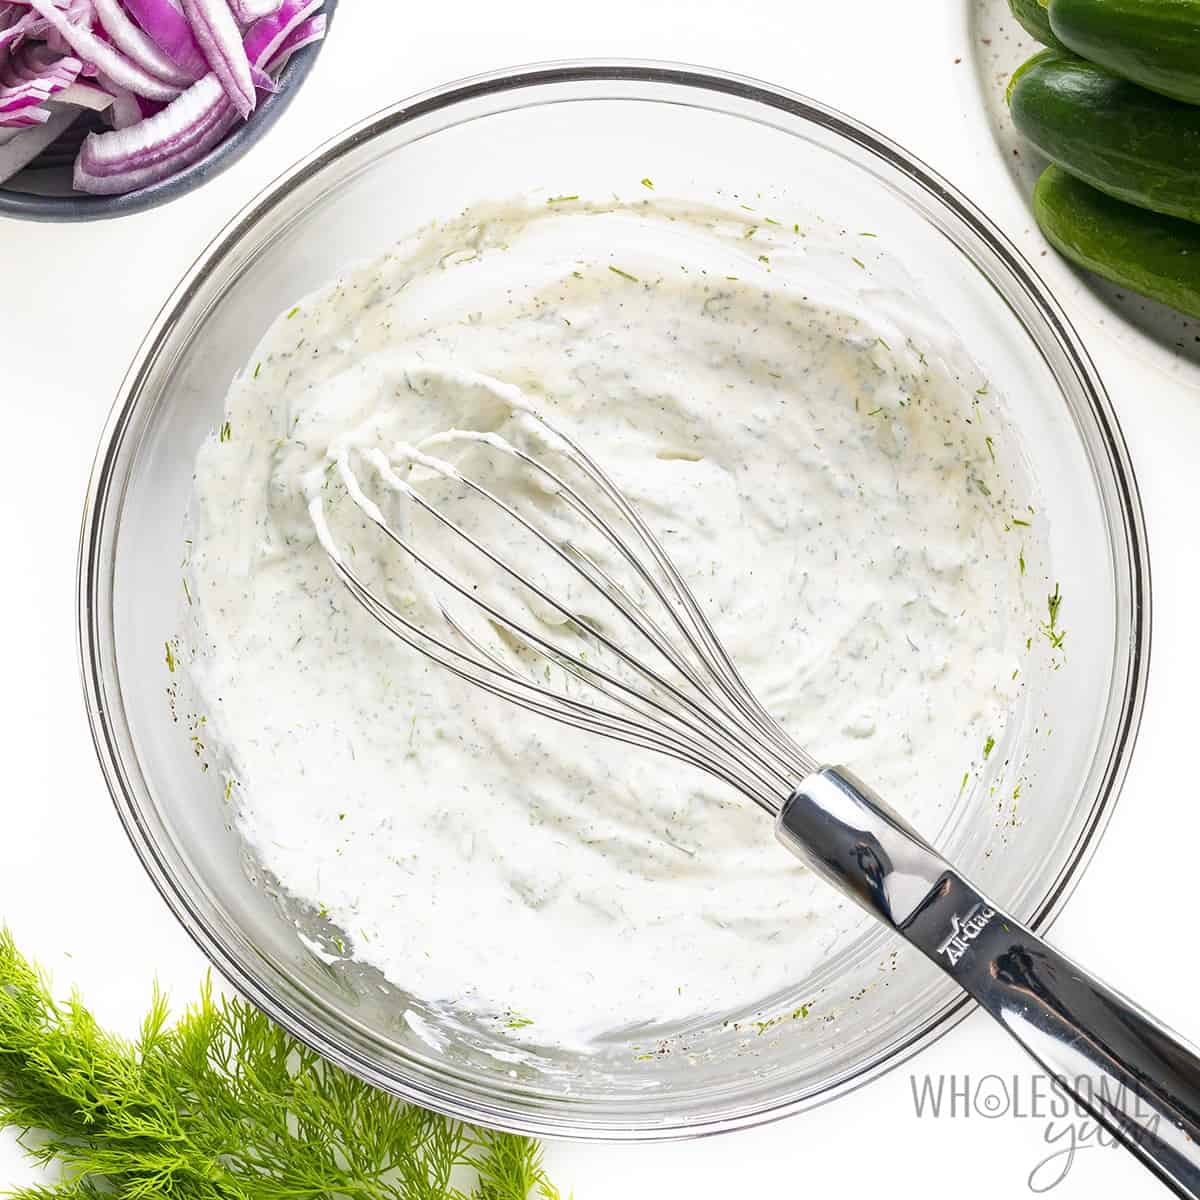 Salad dressing in a bowl with whisk.